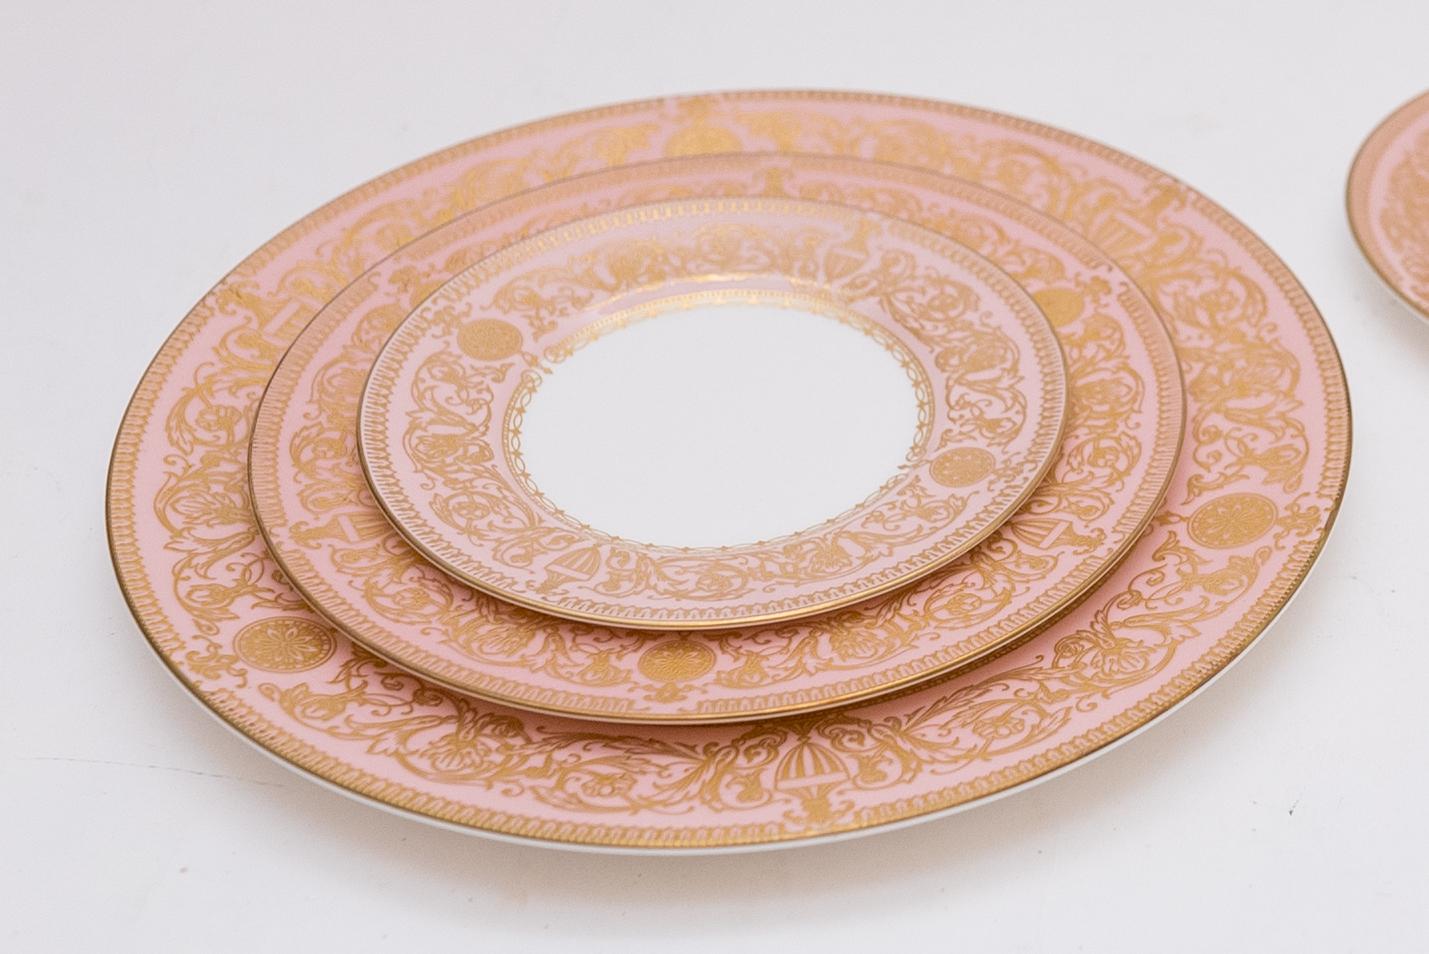 Pretty soft coral pink and embossed gilt dinner service by Royal Worcester. The service is in great condition and features a crisp white porcelain with pink and gold collar decoration. This set includes

12 Dinner Plates Ten and Three Quarter Inch